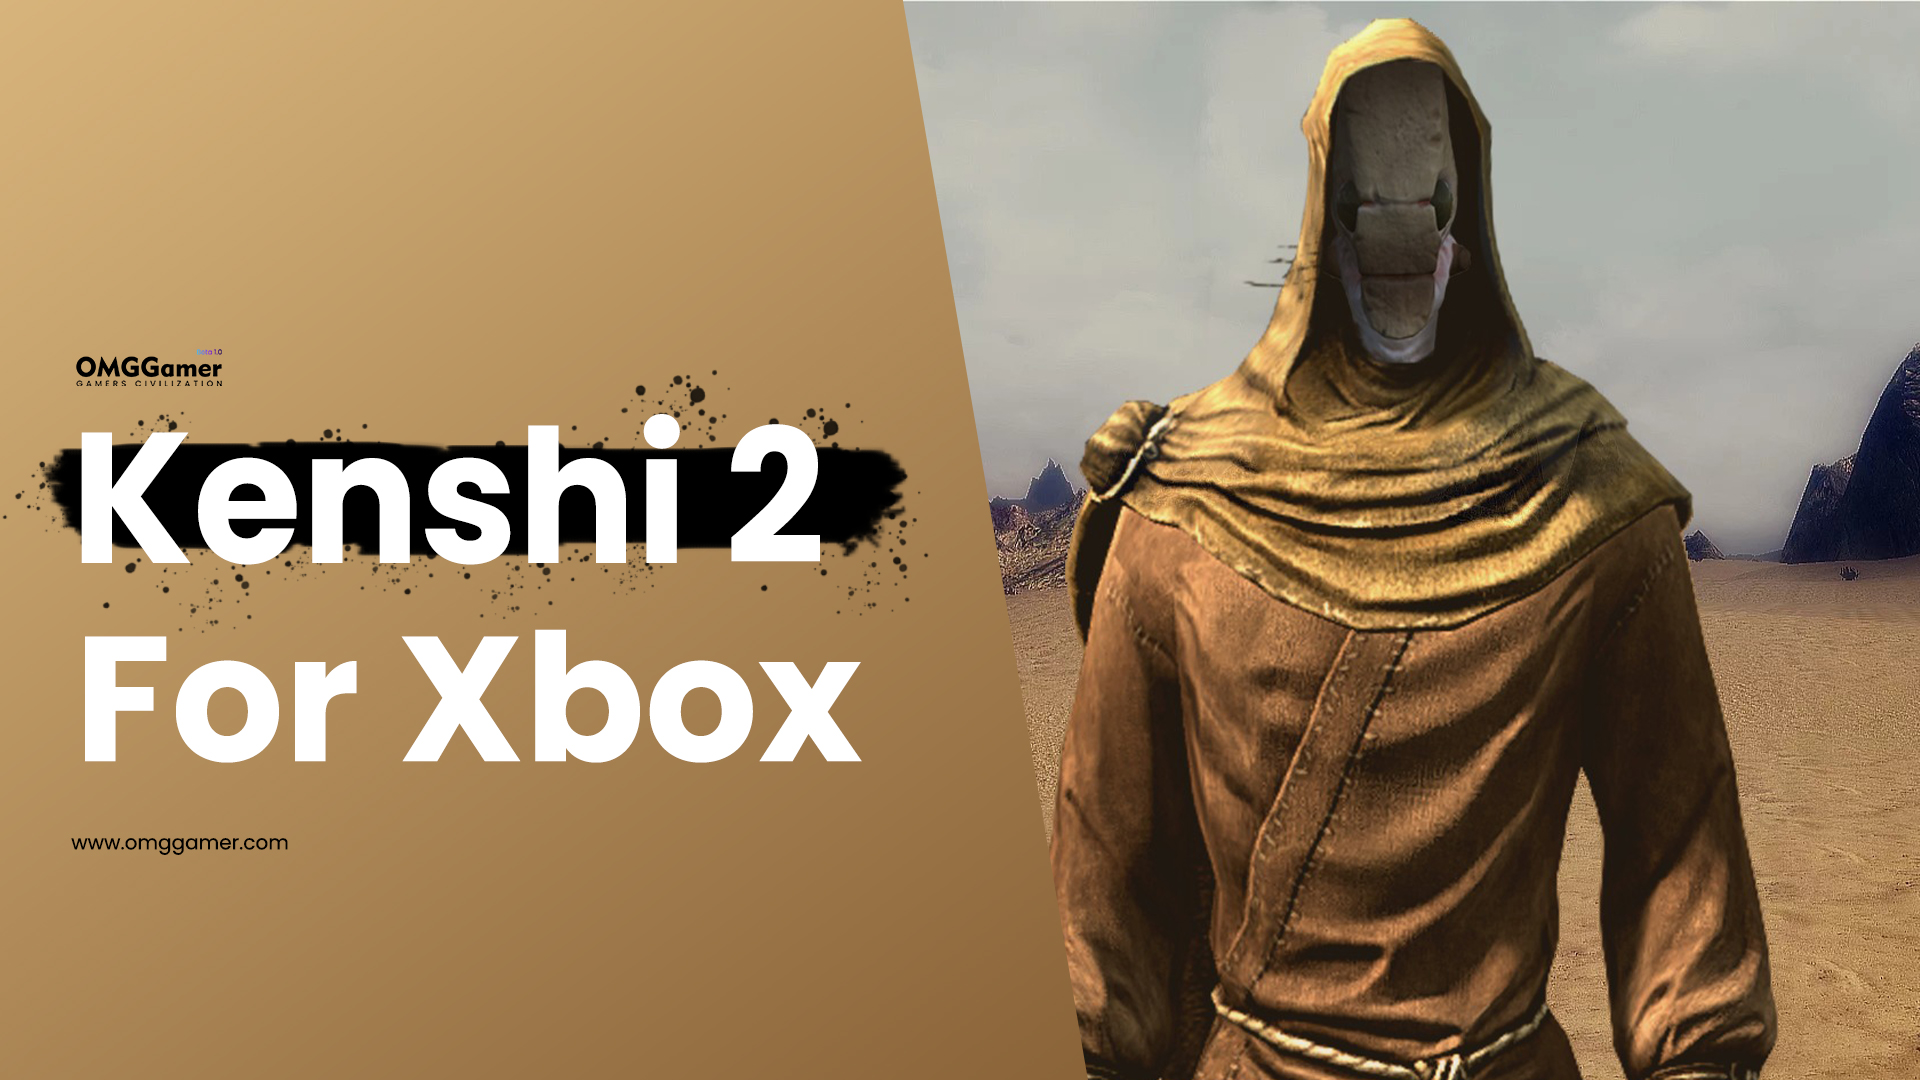 Kenshi 2 for Xbox